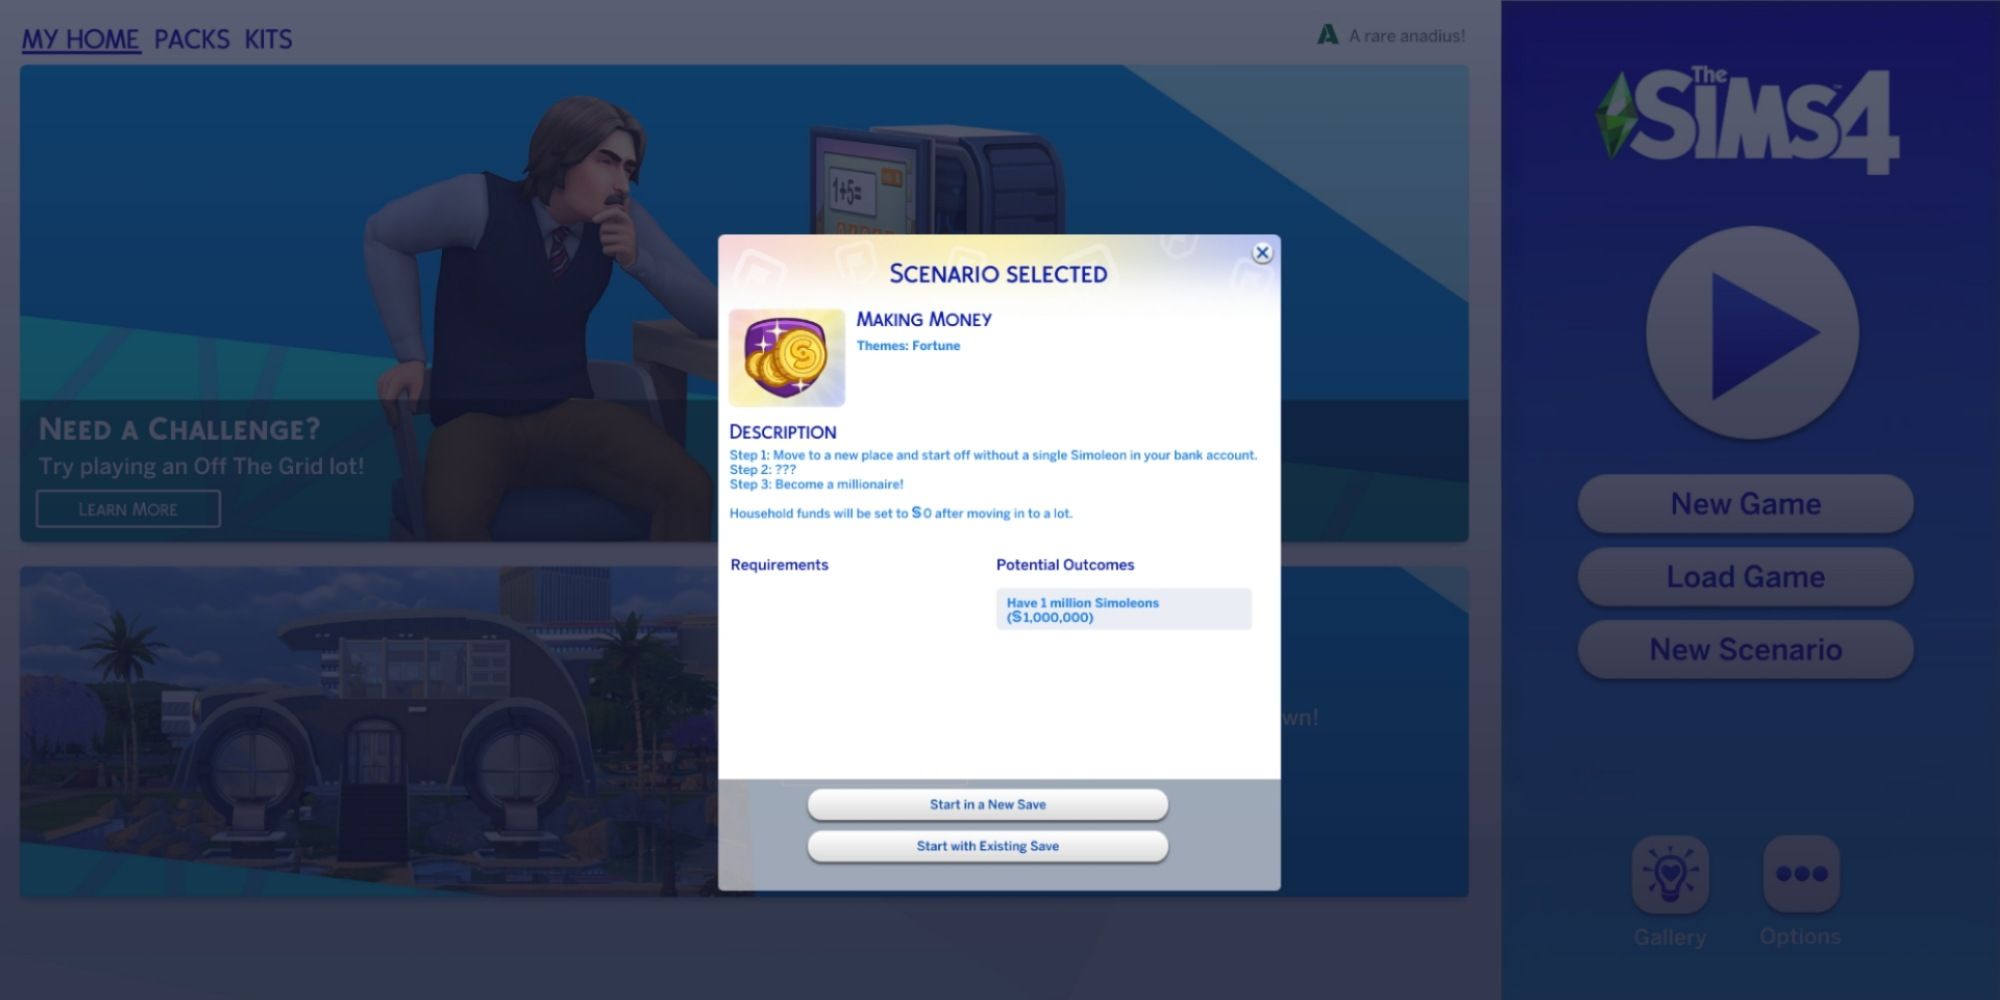 For the very first time in my 10yrs of playing the Sims series, i decided  to play without using money cheats. Not even ten minutes after i start  playing, i get this